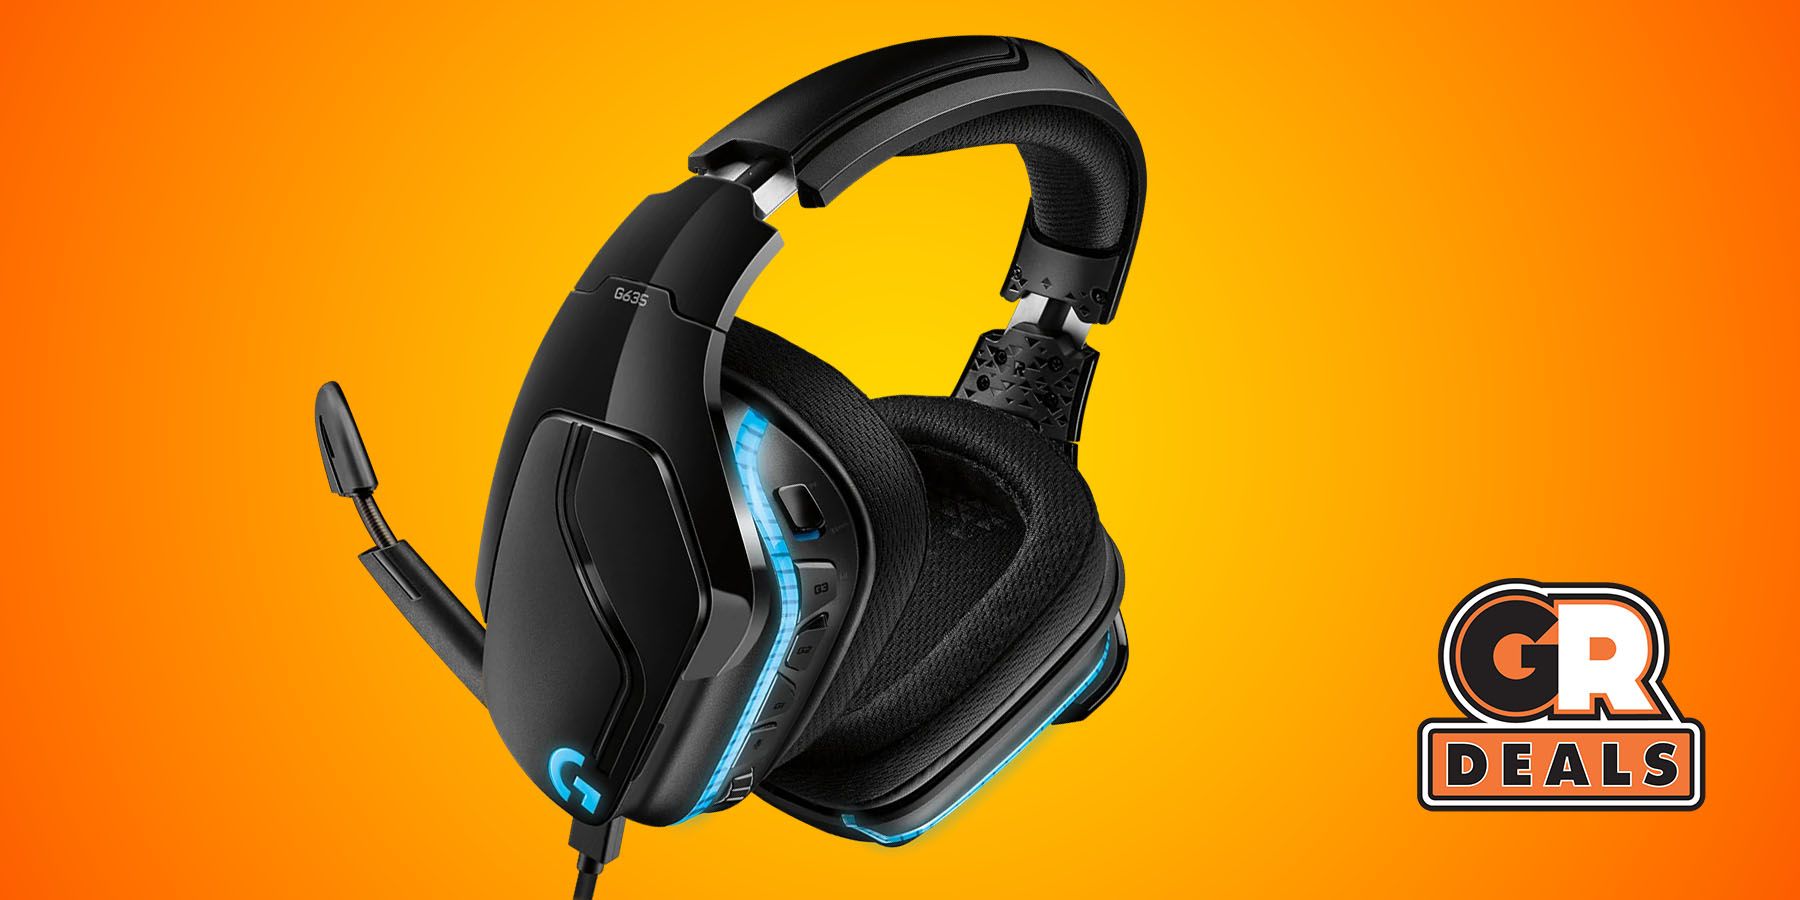 Get the Logitech G635 Gaming Headset for 54% Off!